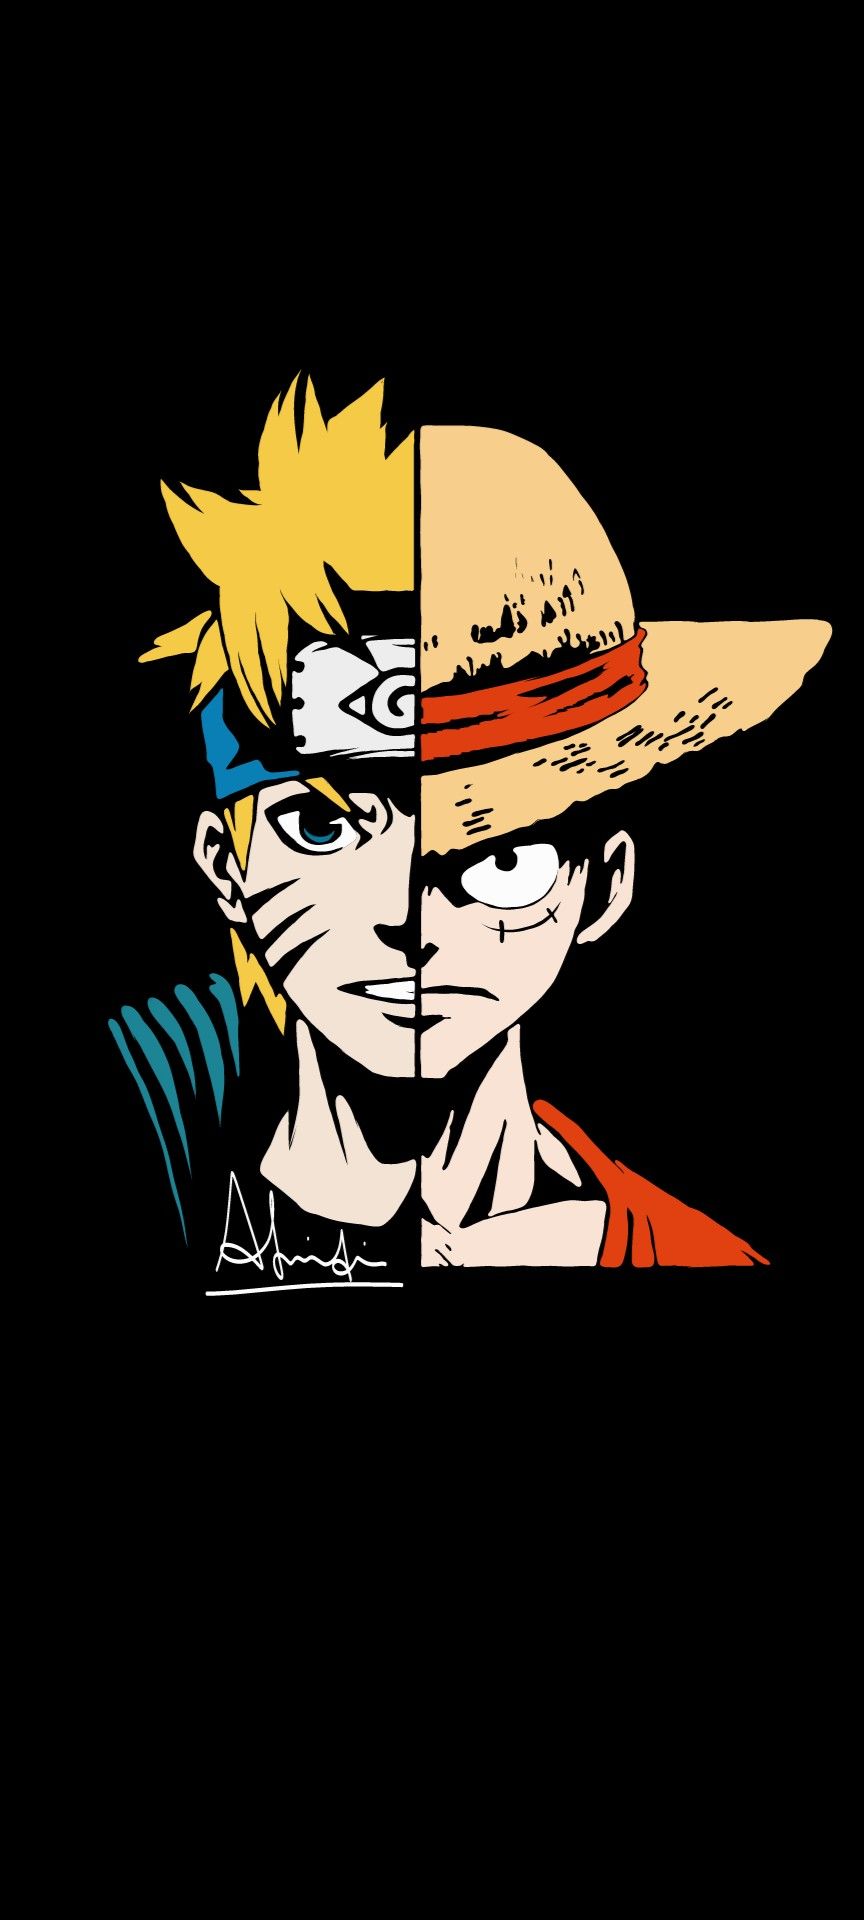 Naruto and Luffy. Android wallpaper anime, Luffy, Anime wallpaper